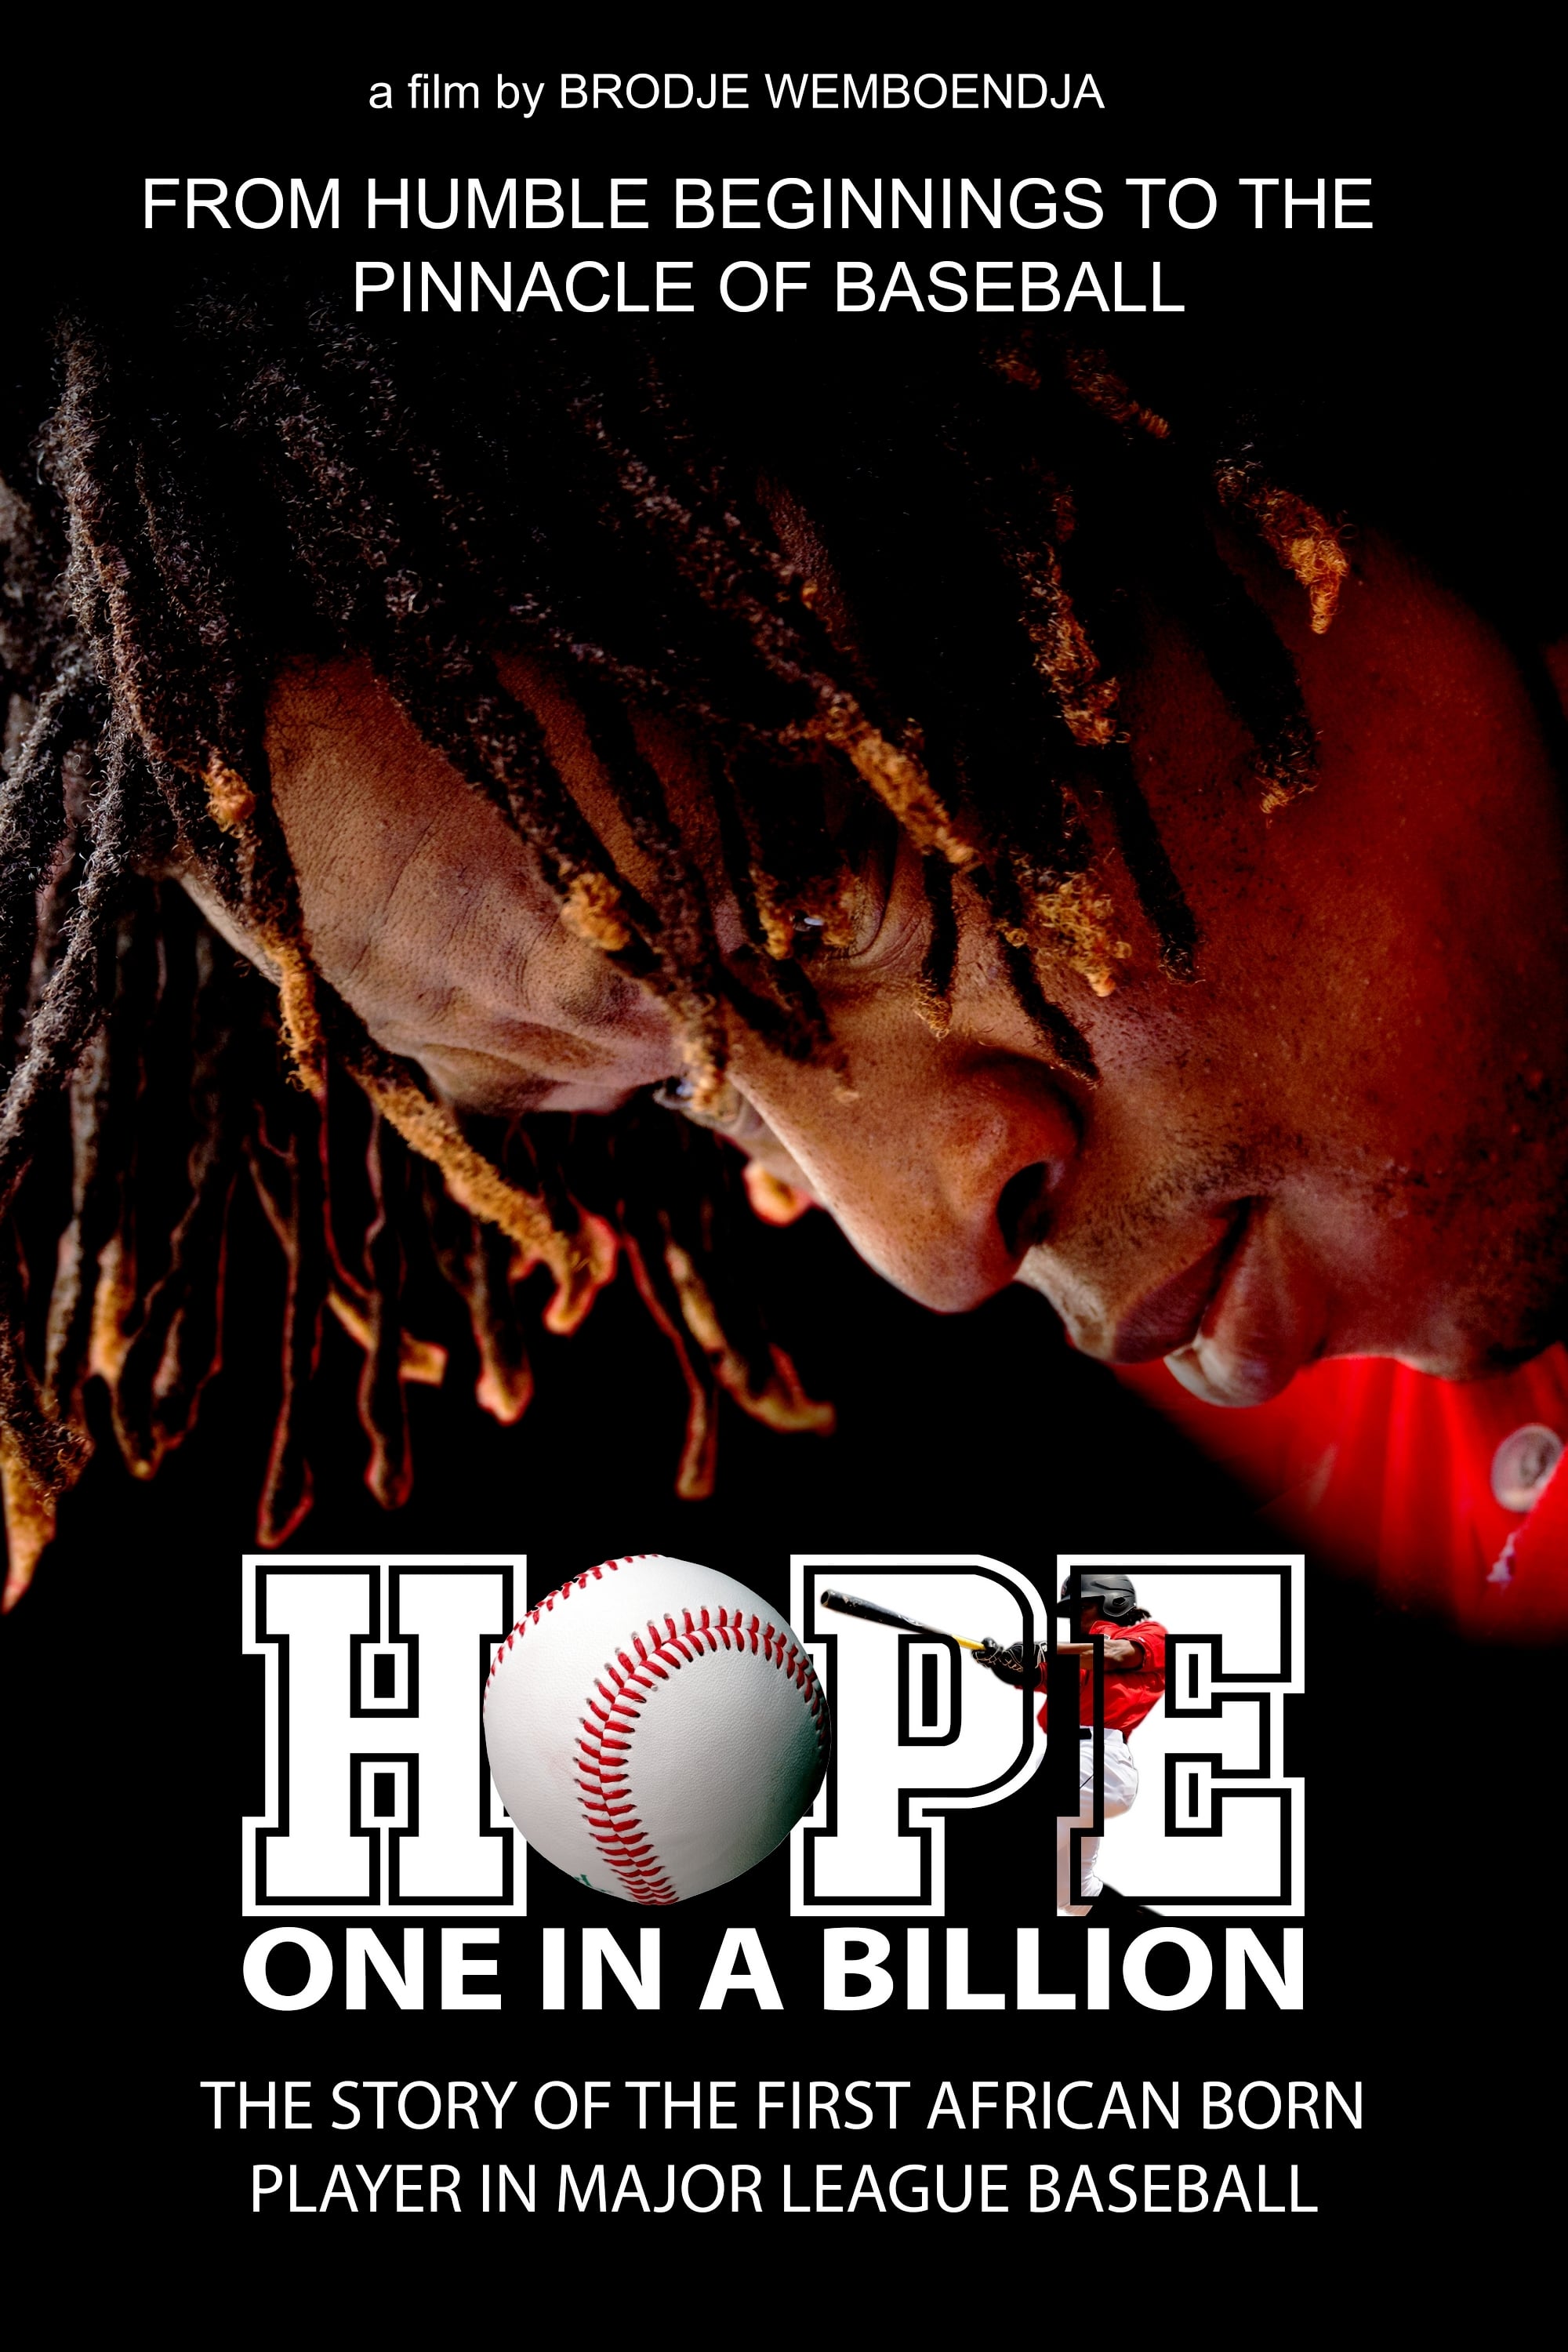 Hope: One in a Billion